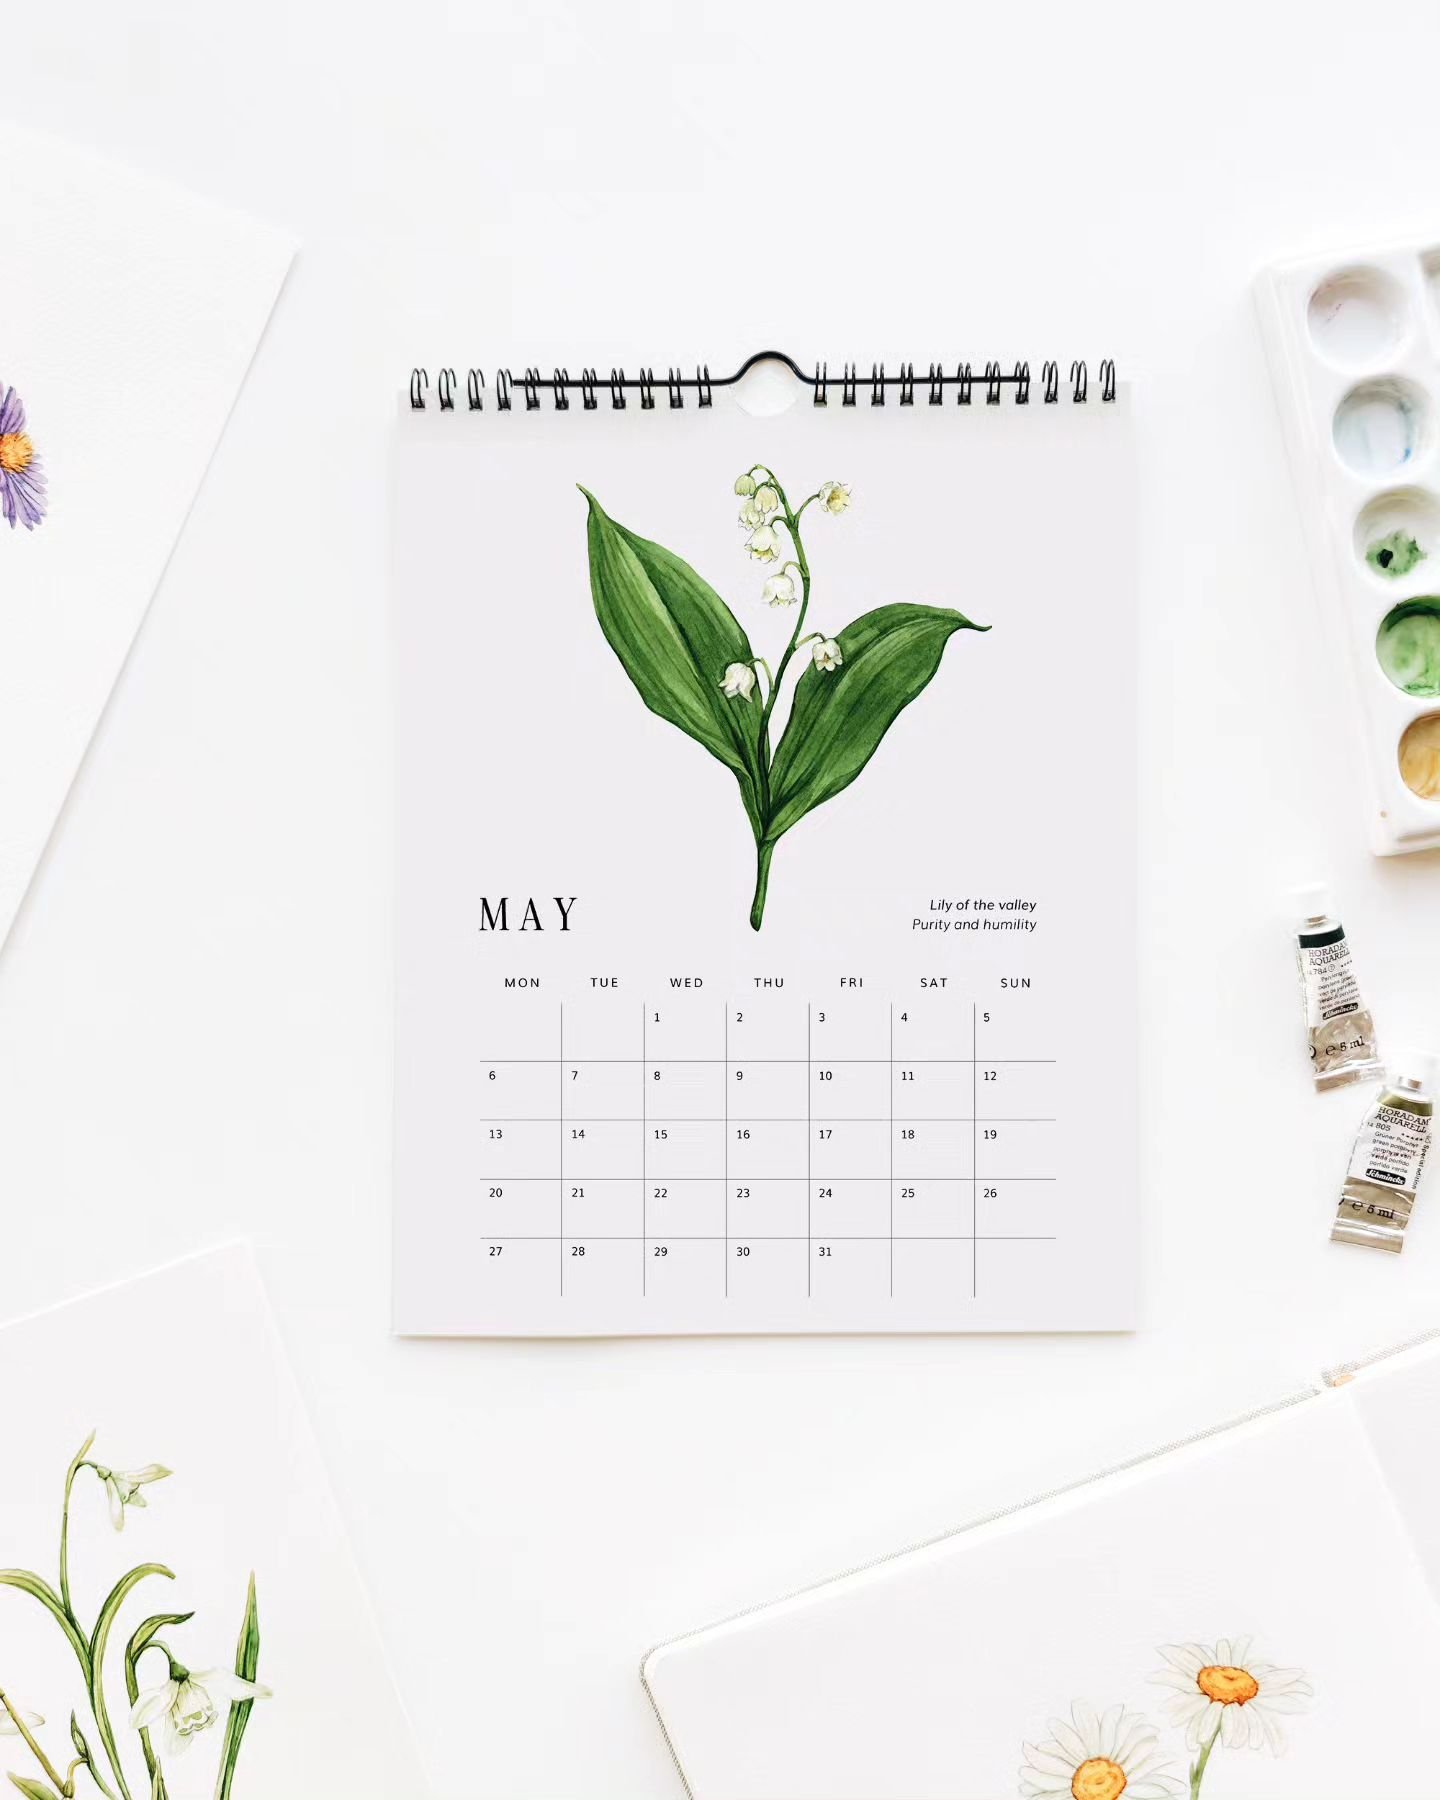 Happy May💚 This month's Birth Flower is Lily of the Valley.
.
.
#illustratedcalendar #illustrationartists #lilyofthevalley #birthflowers #birthflower #flowercalendar